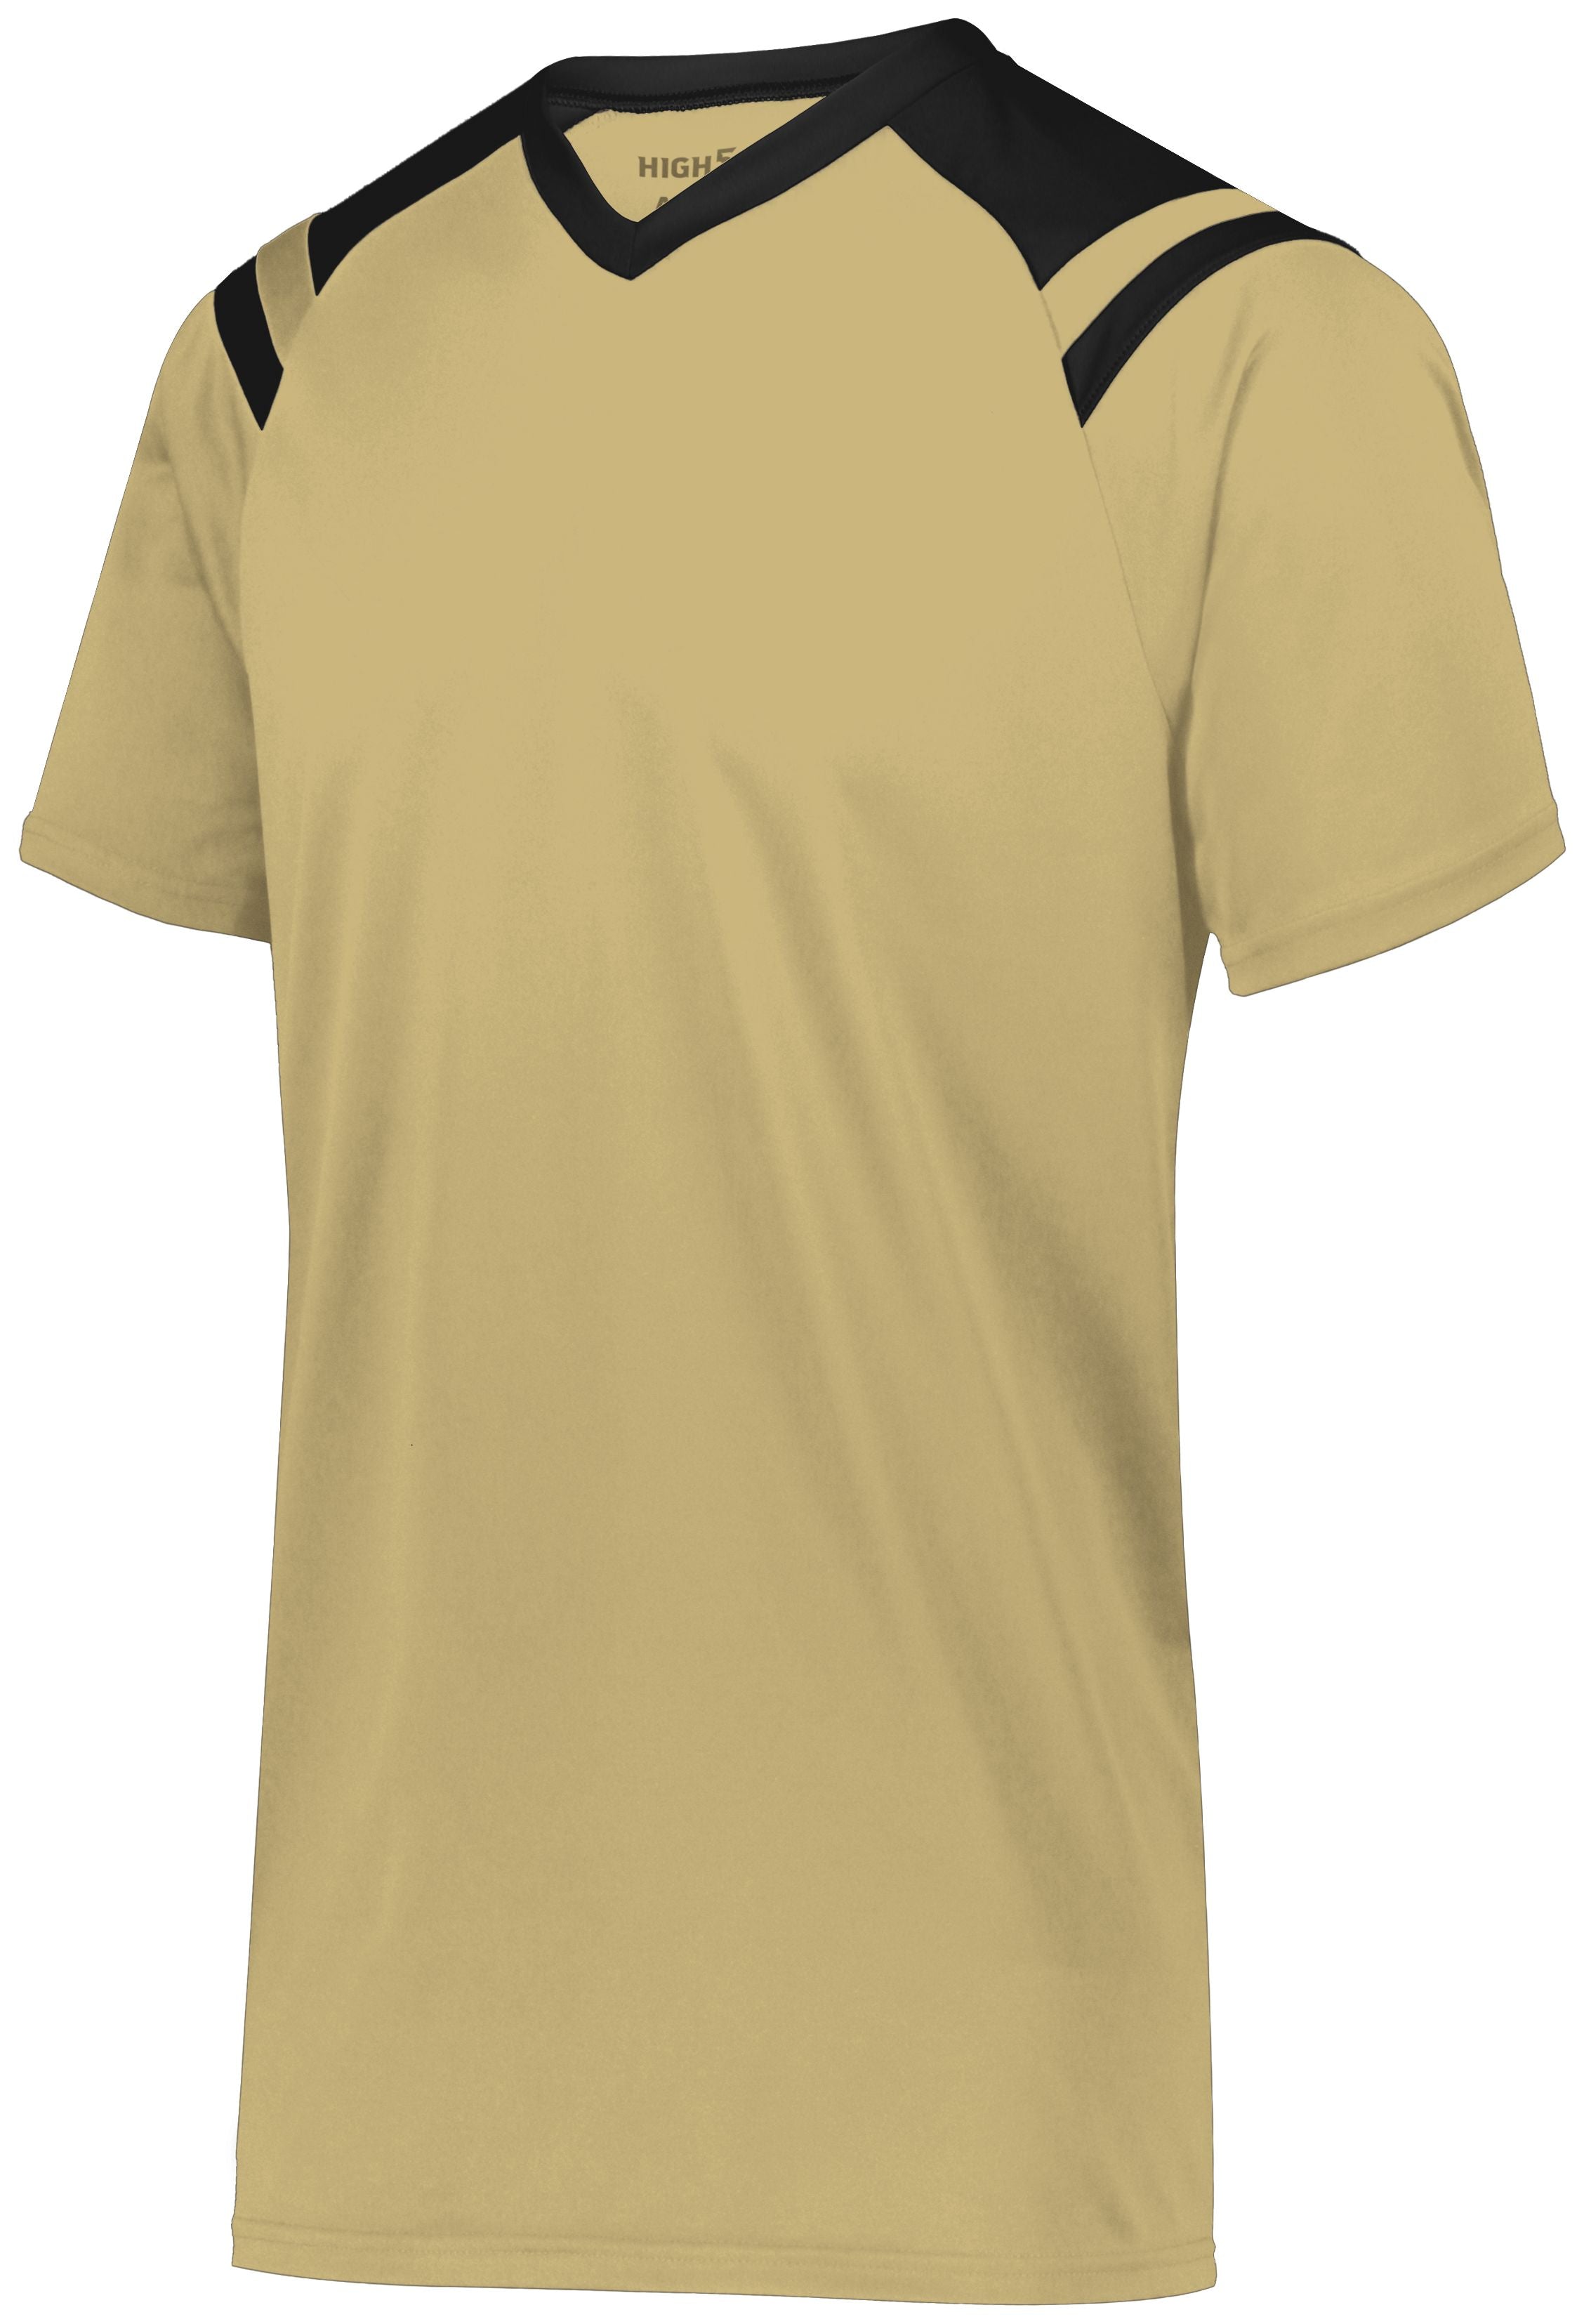 High 5 Sheffield Jersey in Vegas Gold/Black  -Part of the Adult, Adult-Jersey, High5-Products, Soccer, Shirts, All-Sports-1, Sheffield-Soccer-Jerseys product lines at KanaleyCreations.com